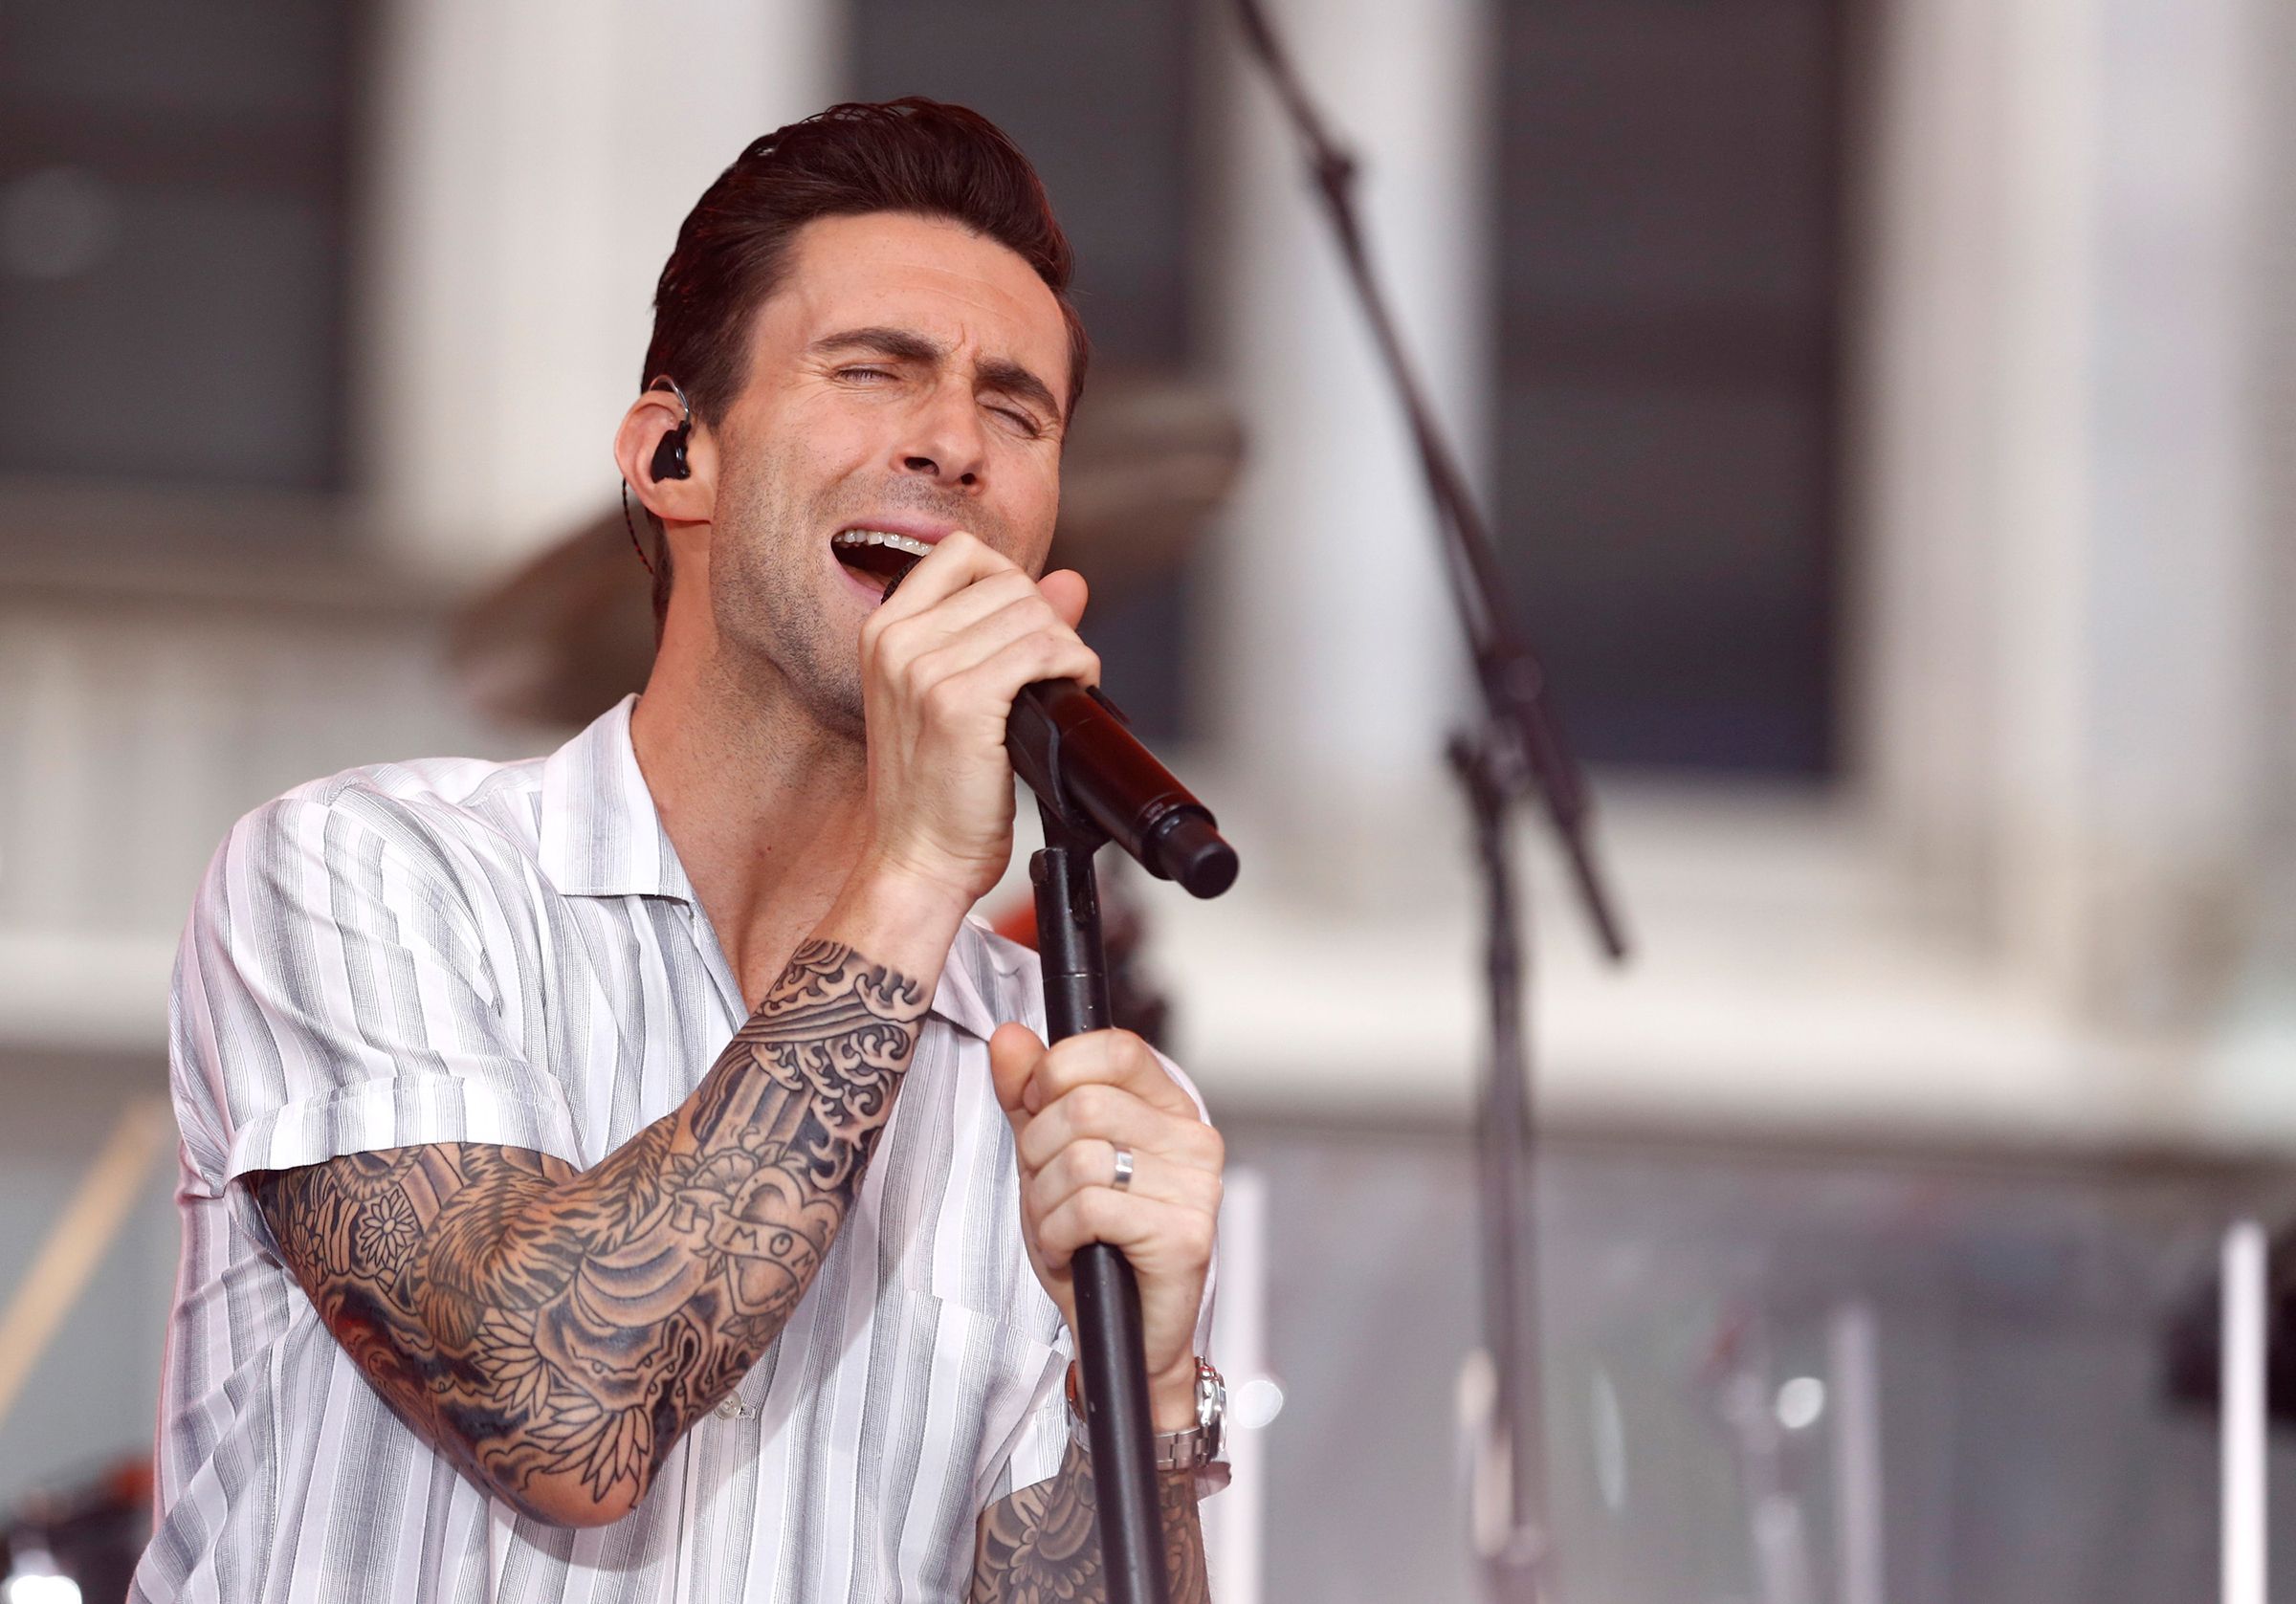 Adam Levine Maroon 5 singer shows off tattoos during shirtless workout   newscomau  Australias leading news site